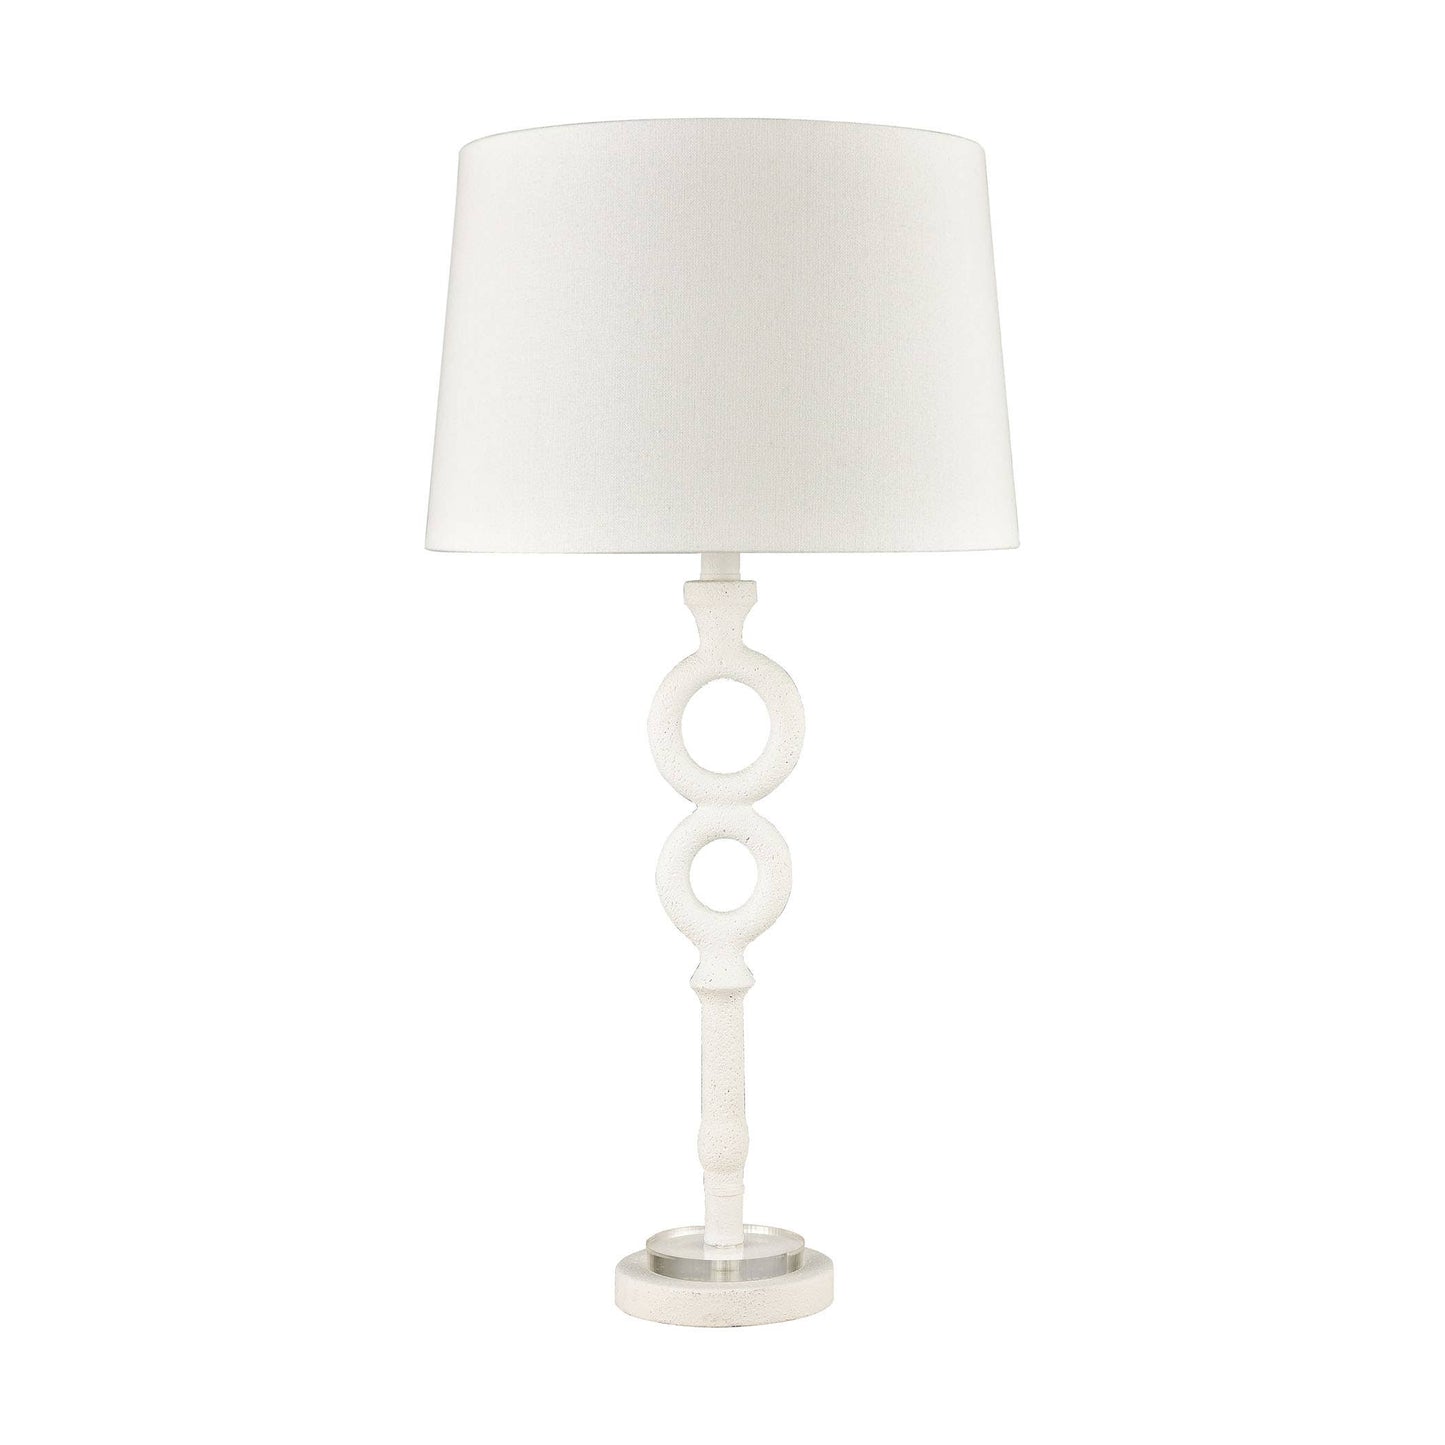 Hammered White Table Lamp